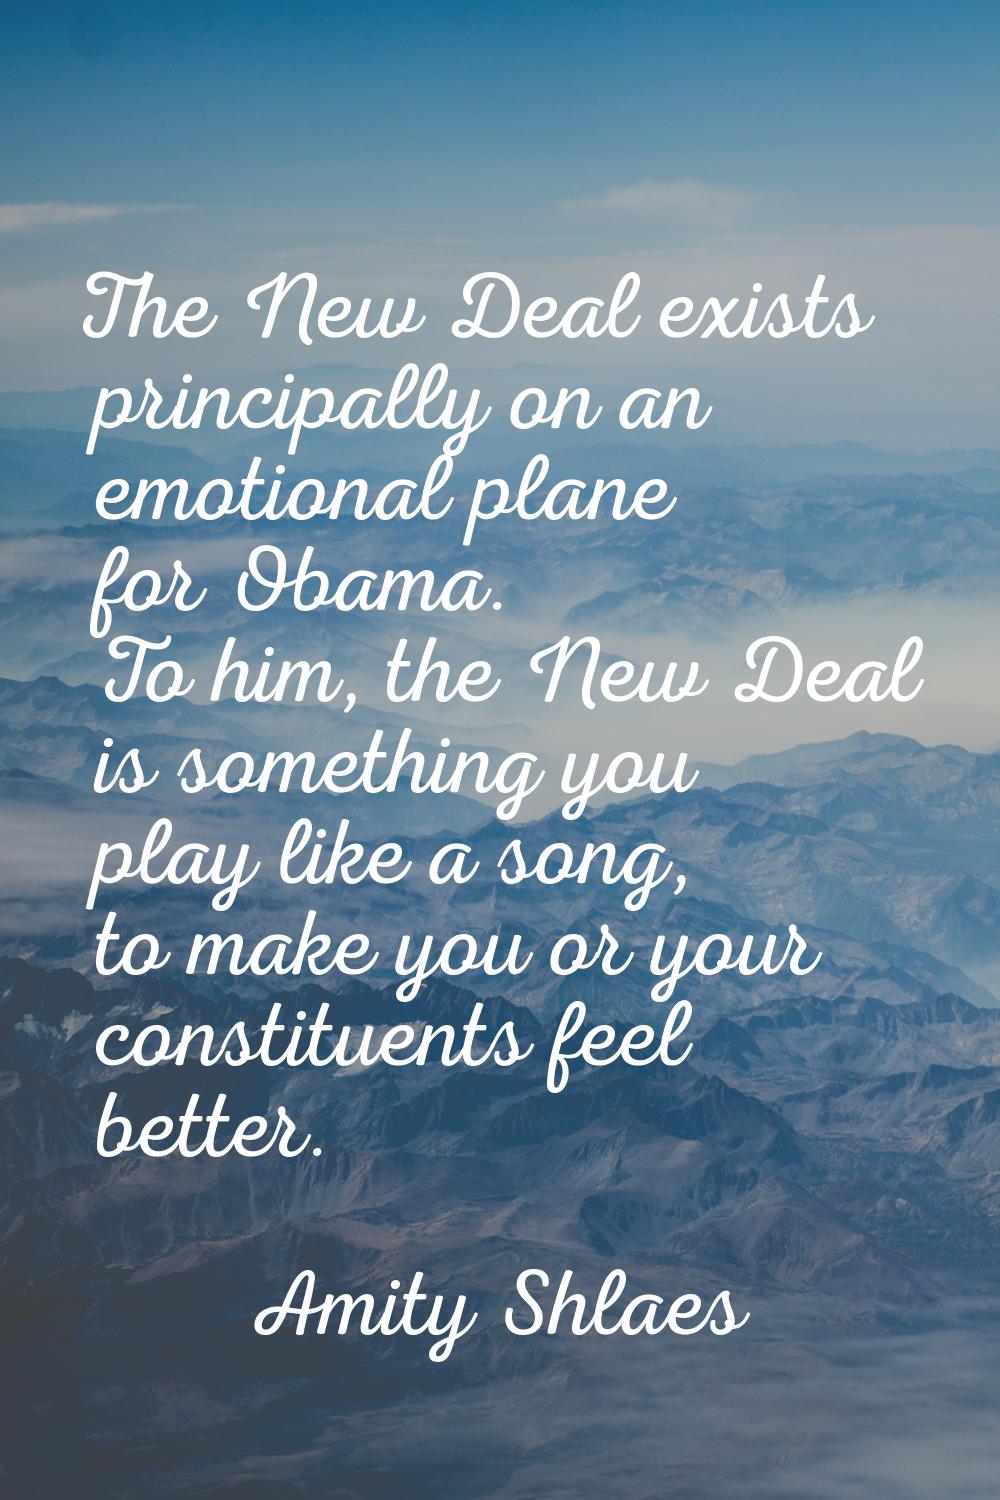 The New Deal exists principally on an emotional plane for Obama. To him, the New Deal is something 